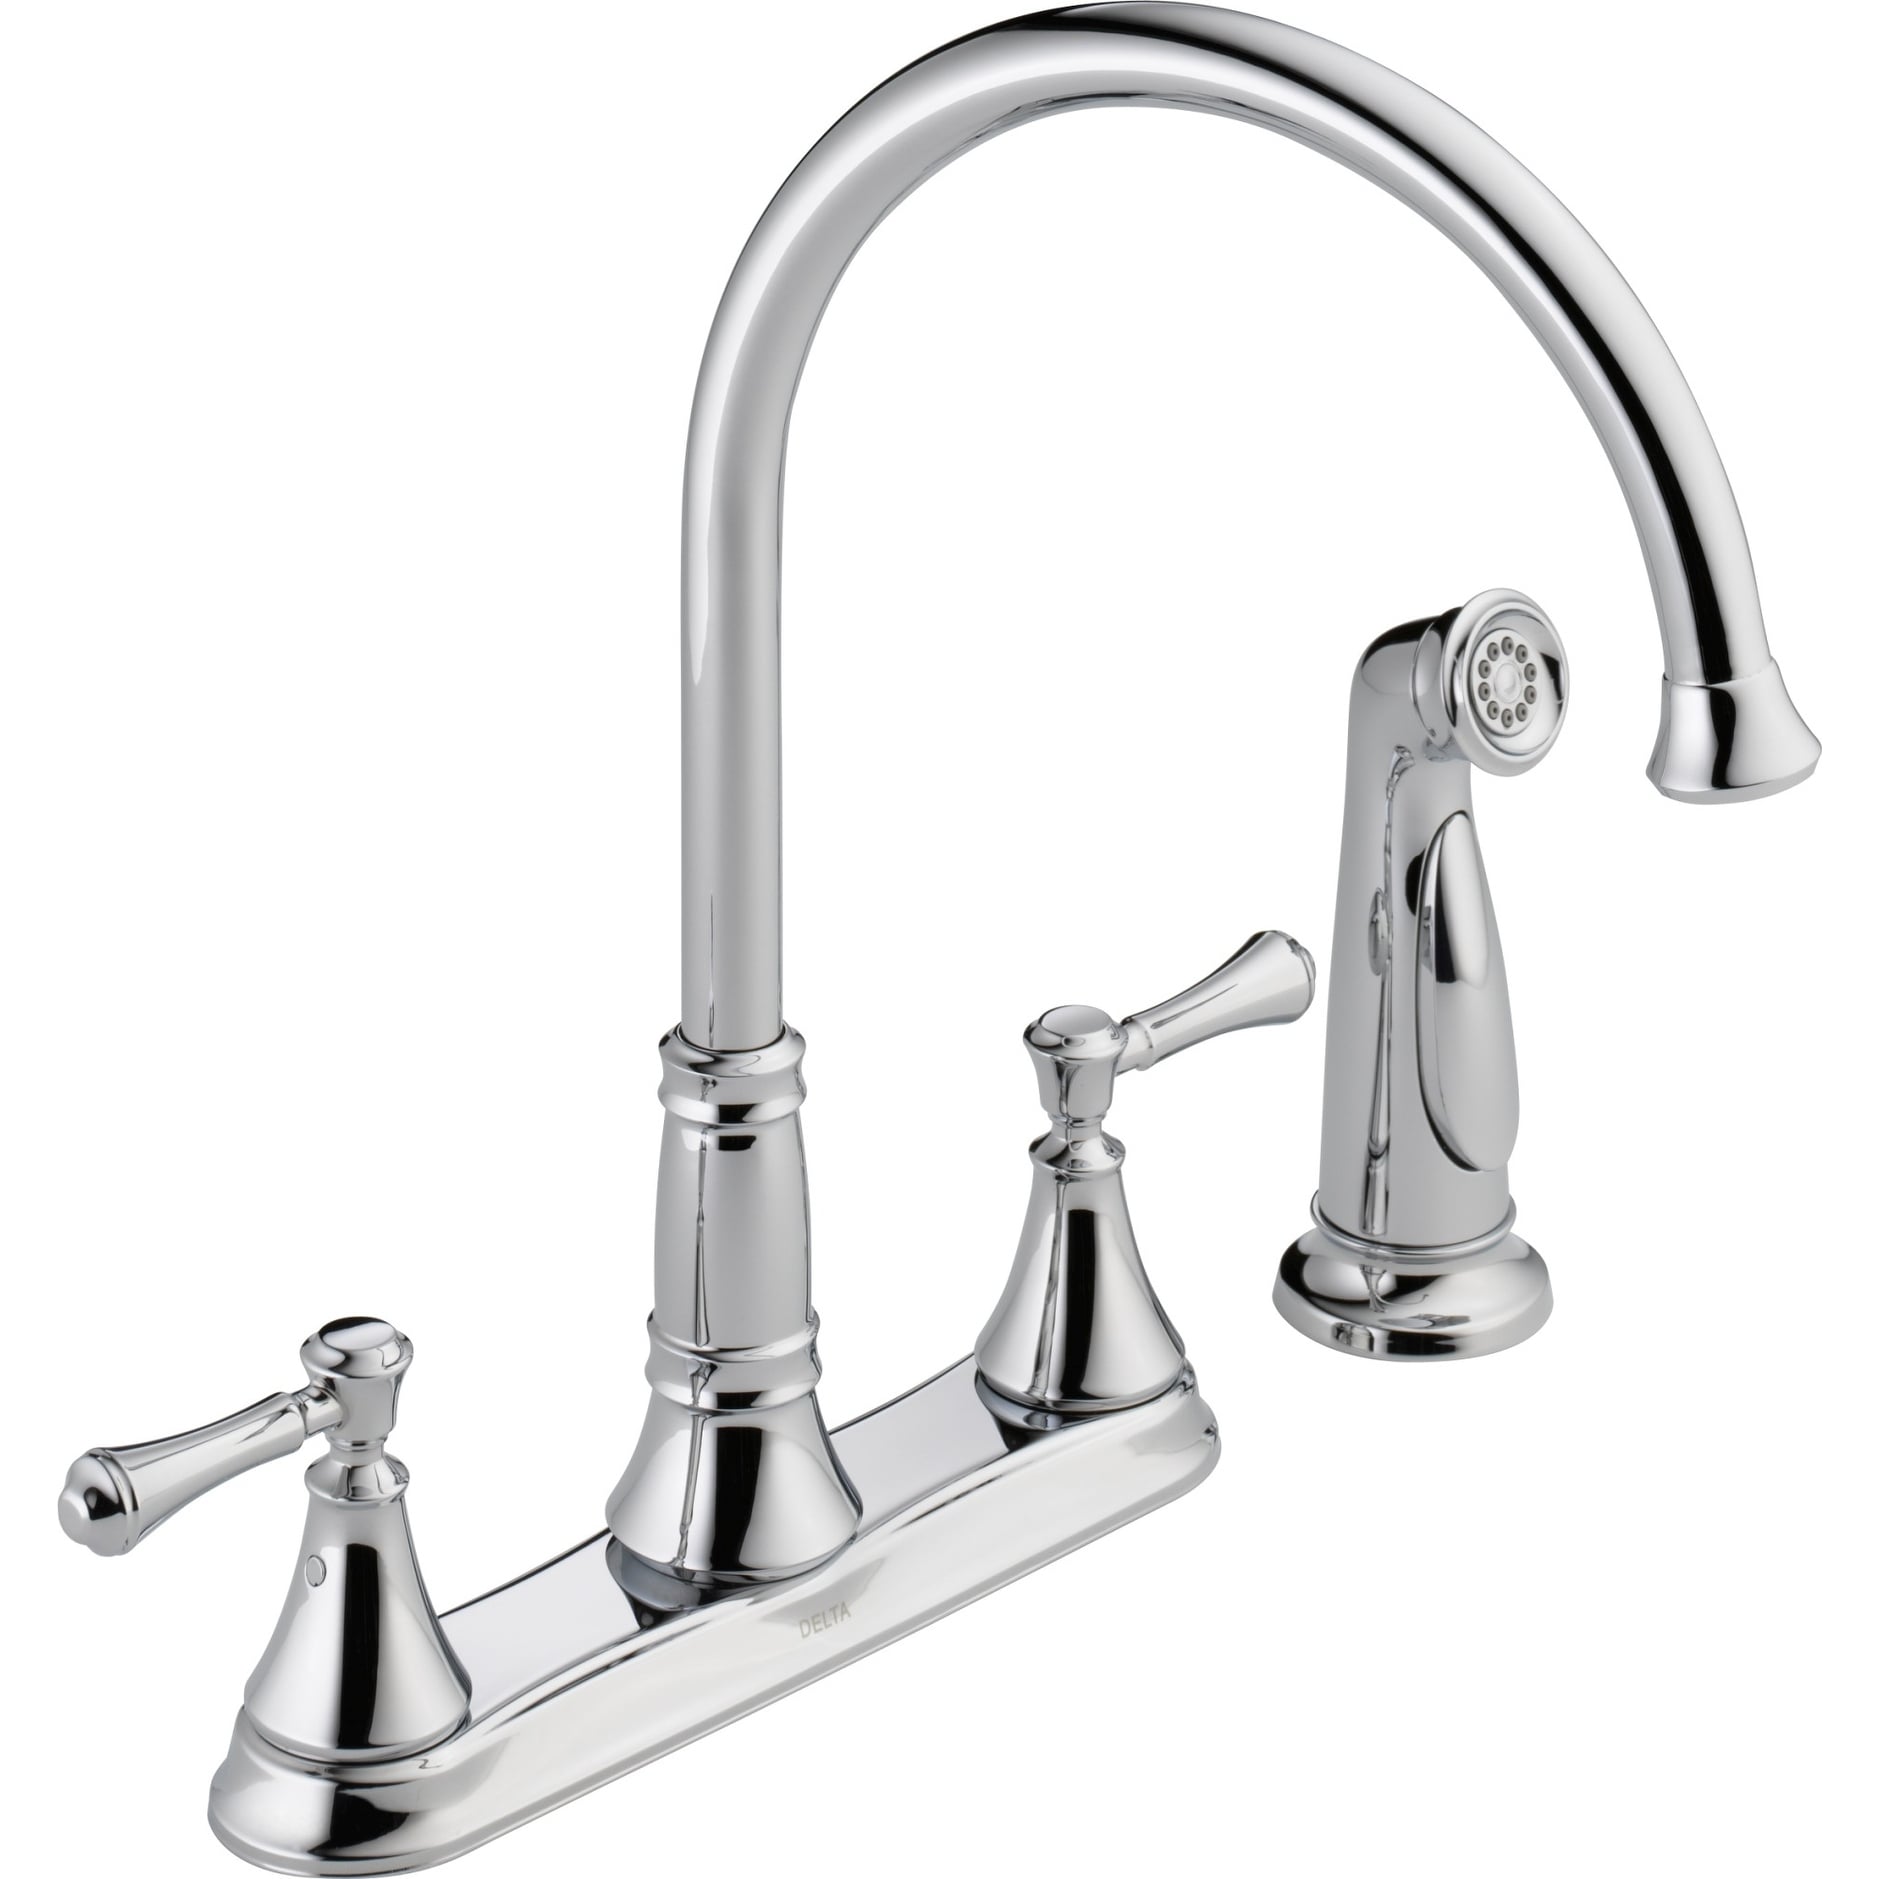 Delta 2497lf Cassidy Kitchen Faucet With Side Spray Overstock 17032380